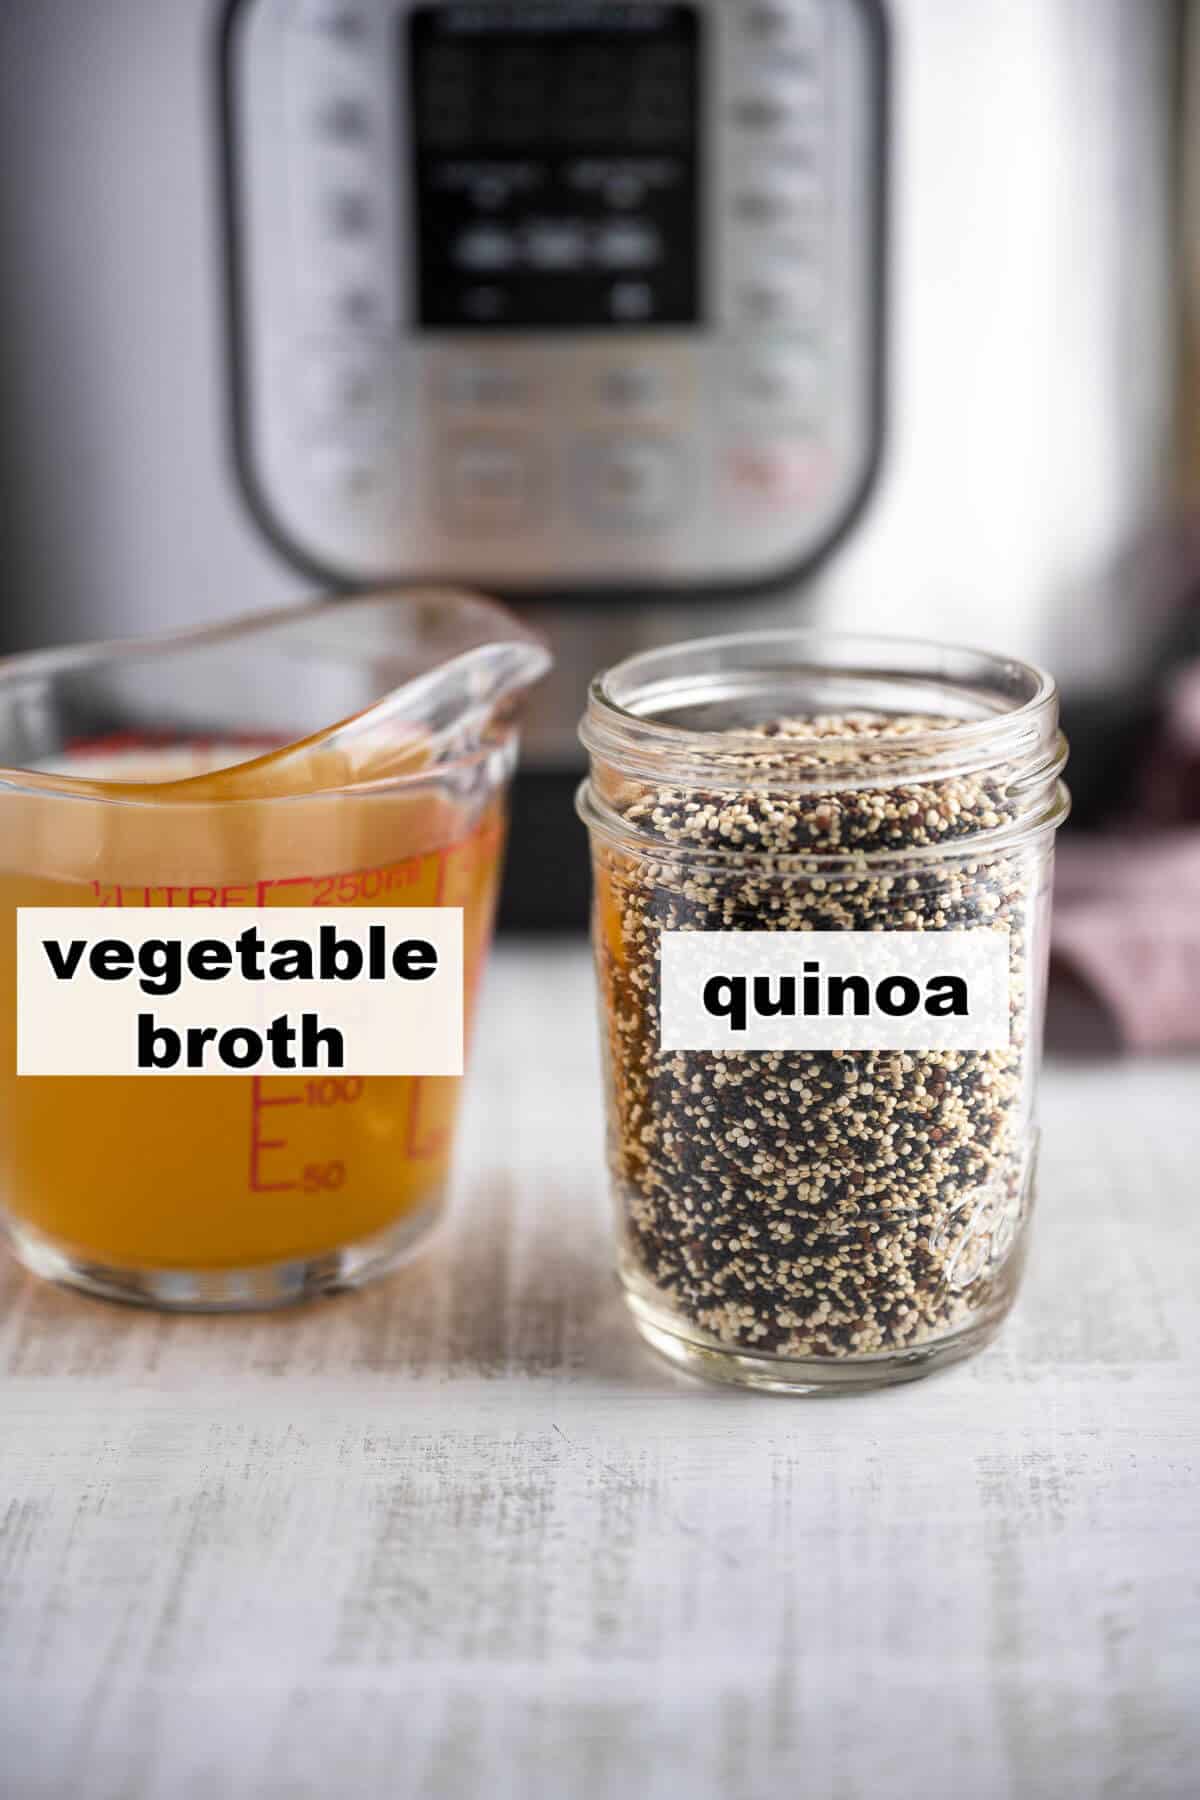 Ingredients to make quinoa in an instant pot: quinoa and vegetable broth.